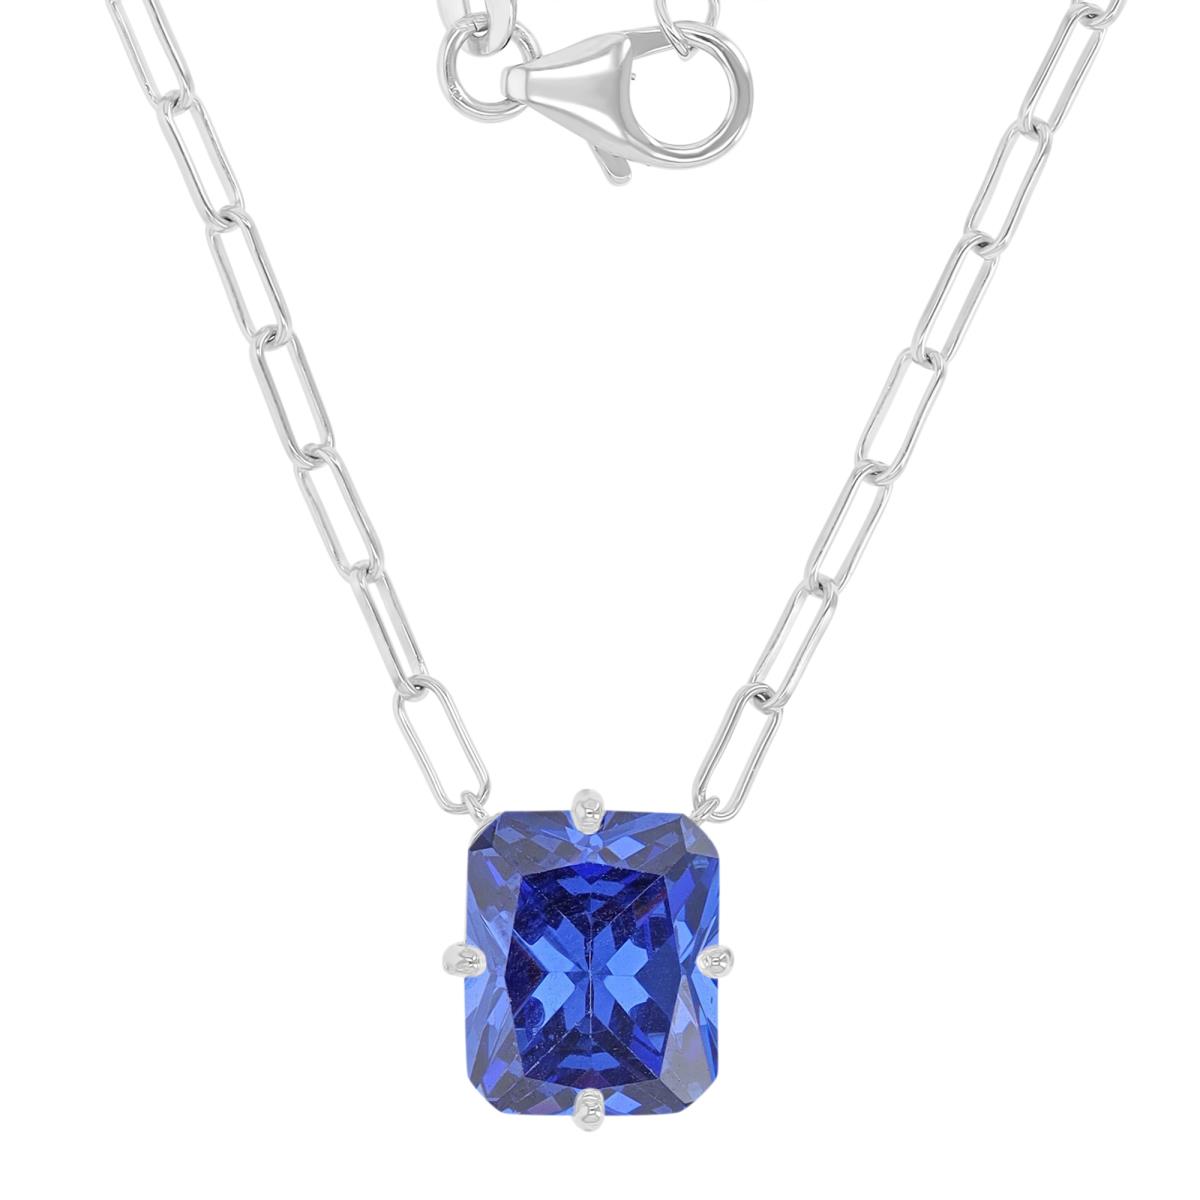 Sterling Silver Rhodium 10x12mm Radiant Cut Tanzanite Paperclip Chain 18+2" Necklace